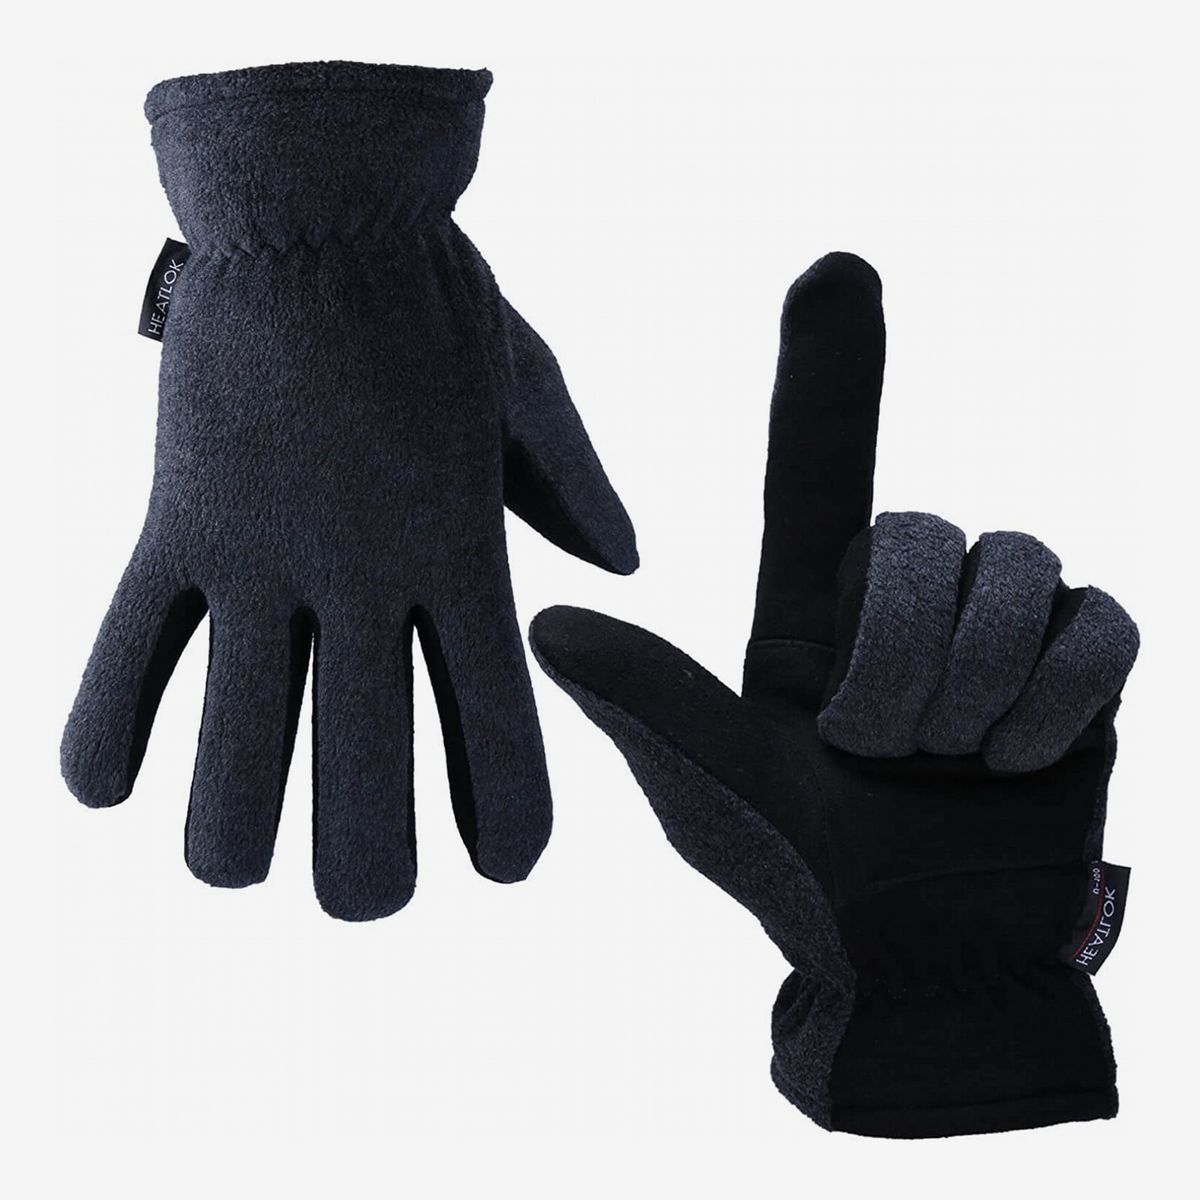 Womens Winter Warm Gloves Lady Super Soft Suede Leather Gloves Touch Screen Thick Fleece Lined Gloves Cold Weather Windproof Outdoor Sports Gloves 